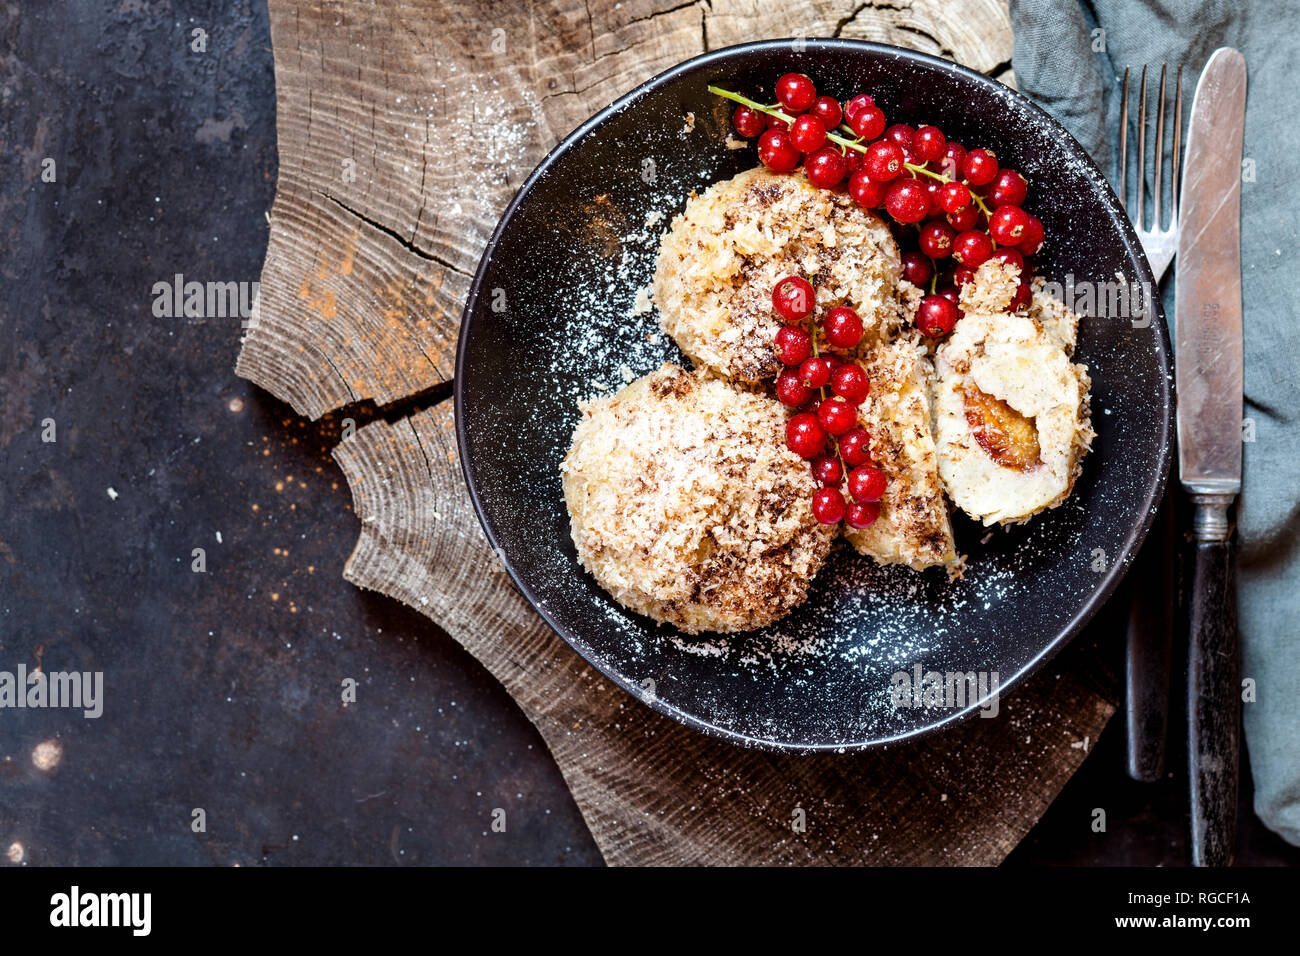 Plum filled sweet dumplings with coconut-cinnamon crust and redcurrants Stock Photo